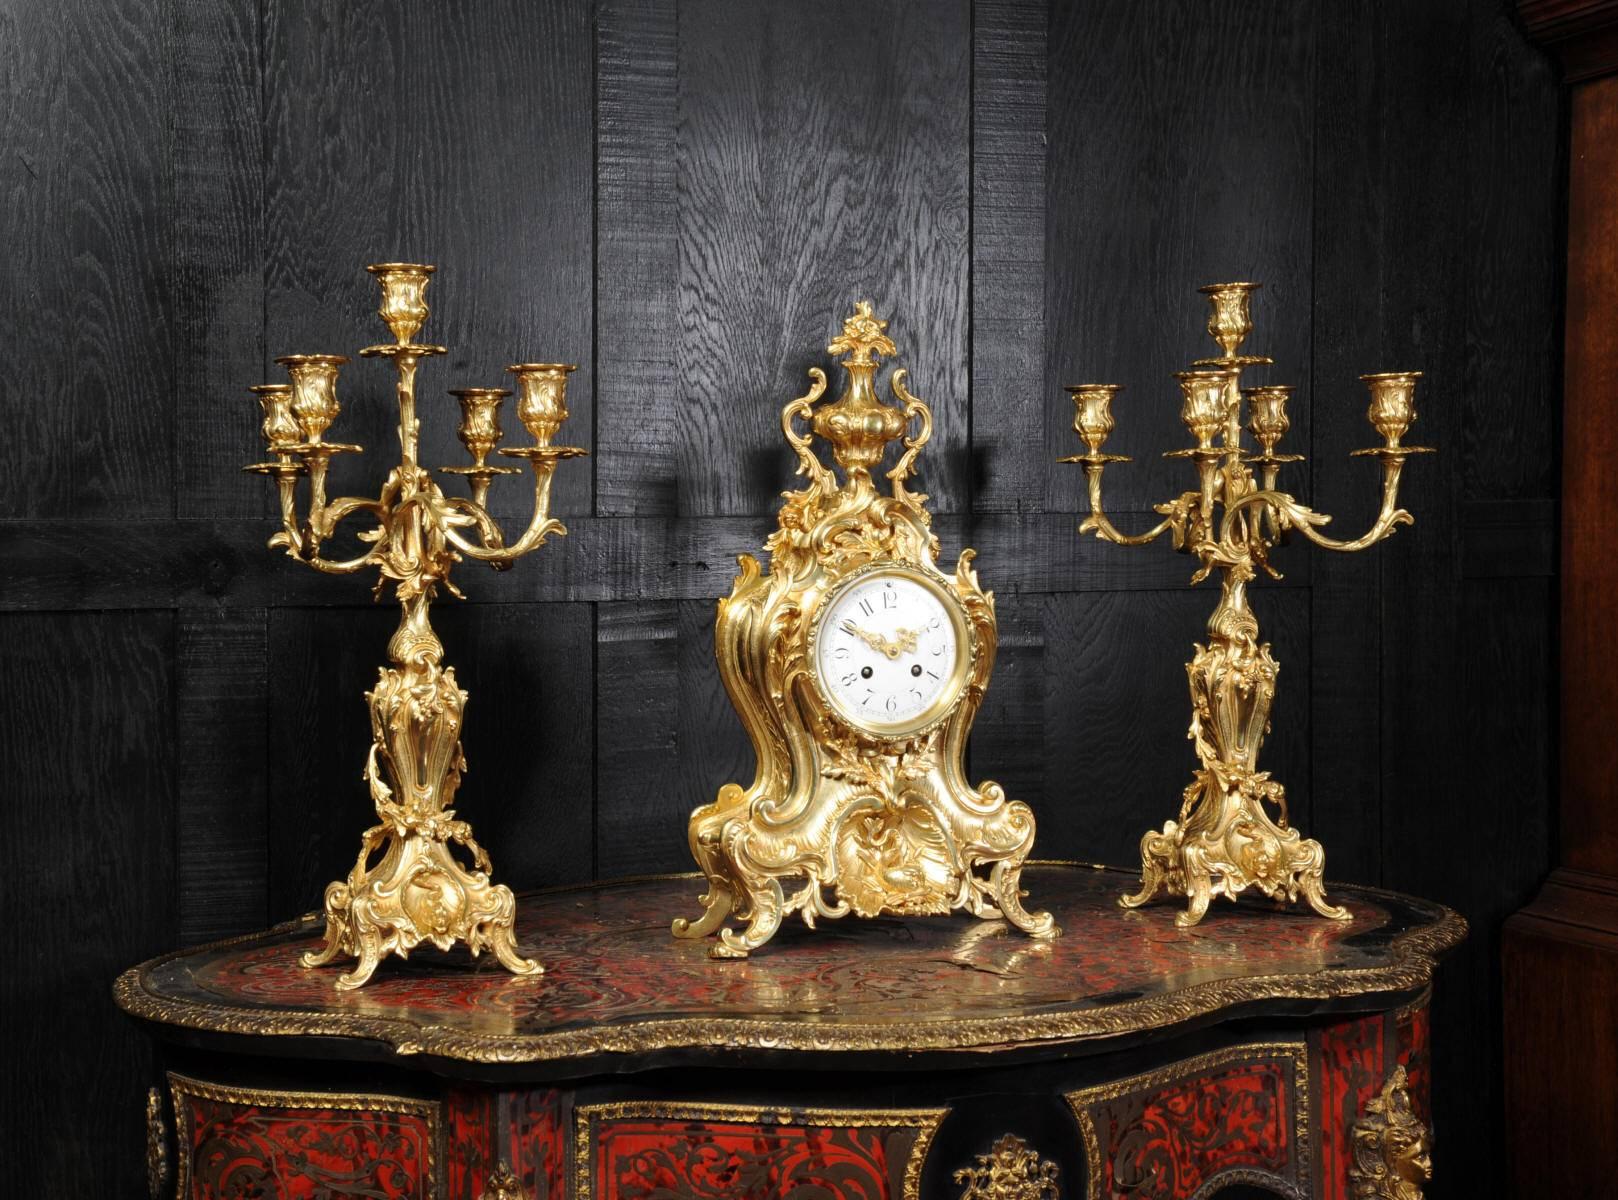 A stunning and large original antique French ormolu (gilded bronze) clock set, circa 1880, featuring dolphins. It is of the most beautiful Rococo style, asymmetric waisted case decorated with 'C' scrolls, acanthus leaves and floral swags. To the top